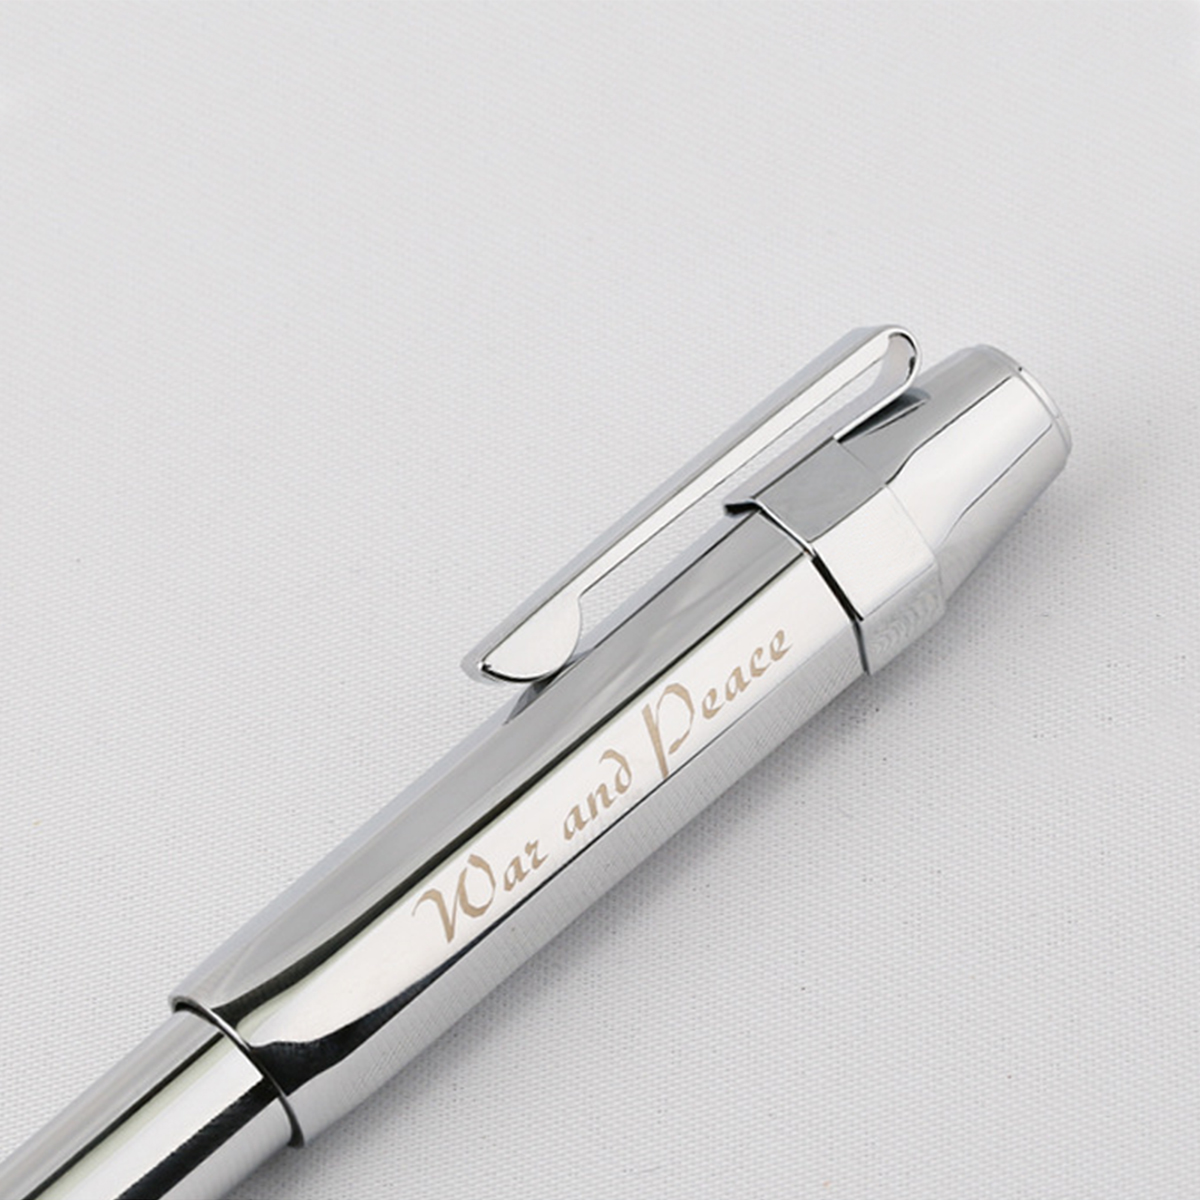 Metal-Fountain-Pen-Short-Smooth-Calligraphy-Writing-Pen-Ink-Gel-Pen-with-Iron-Case-Gift-for-Students-1755553-8